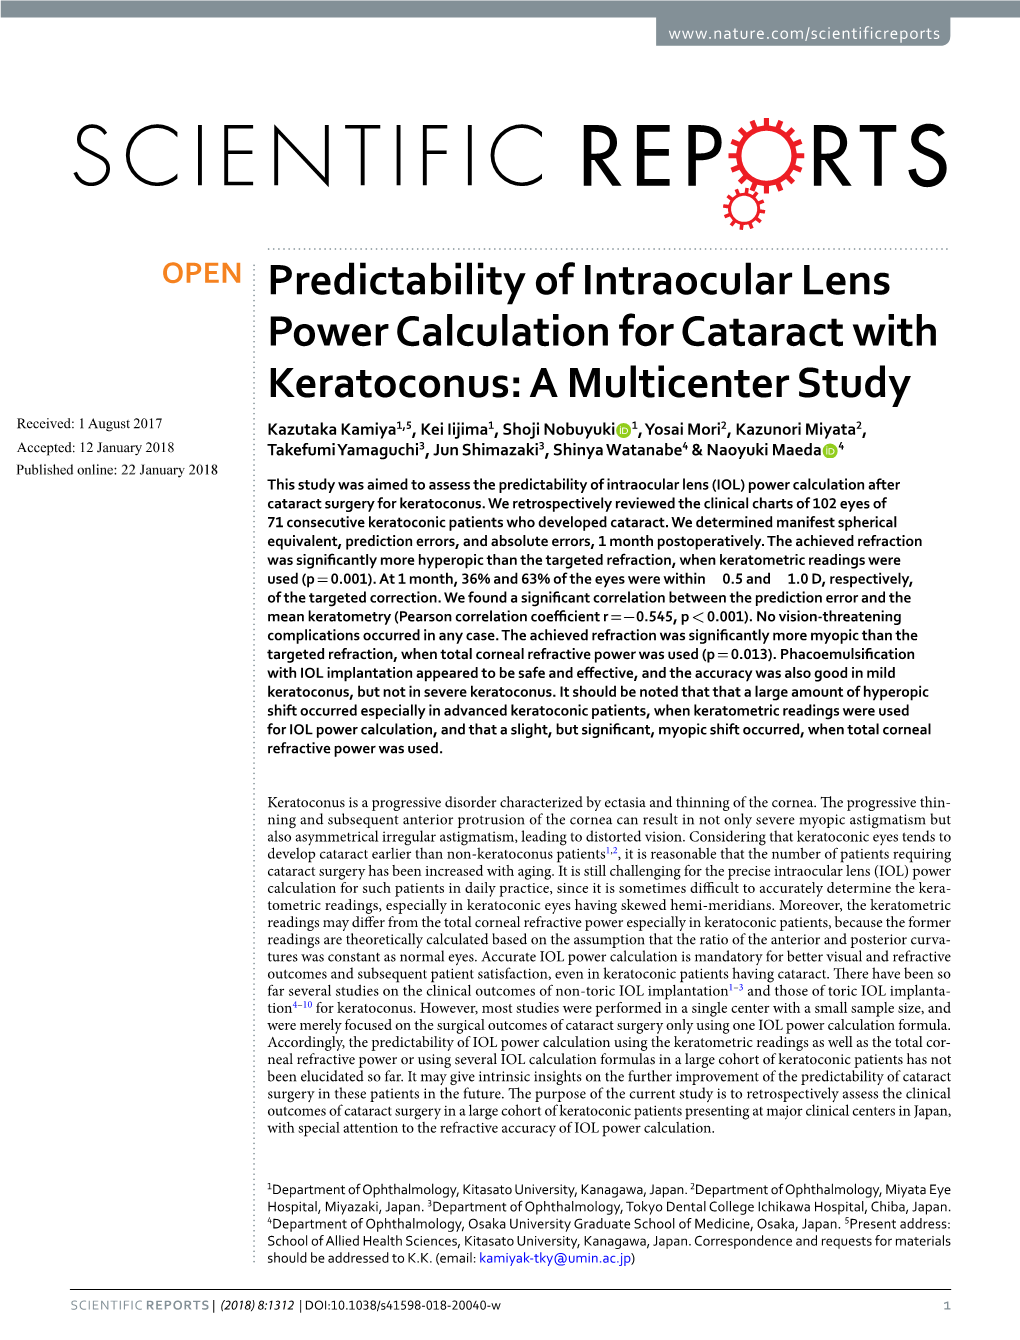 Predictability of Intraocular Lens Power Calculation For